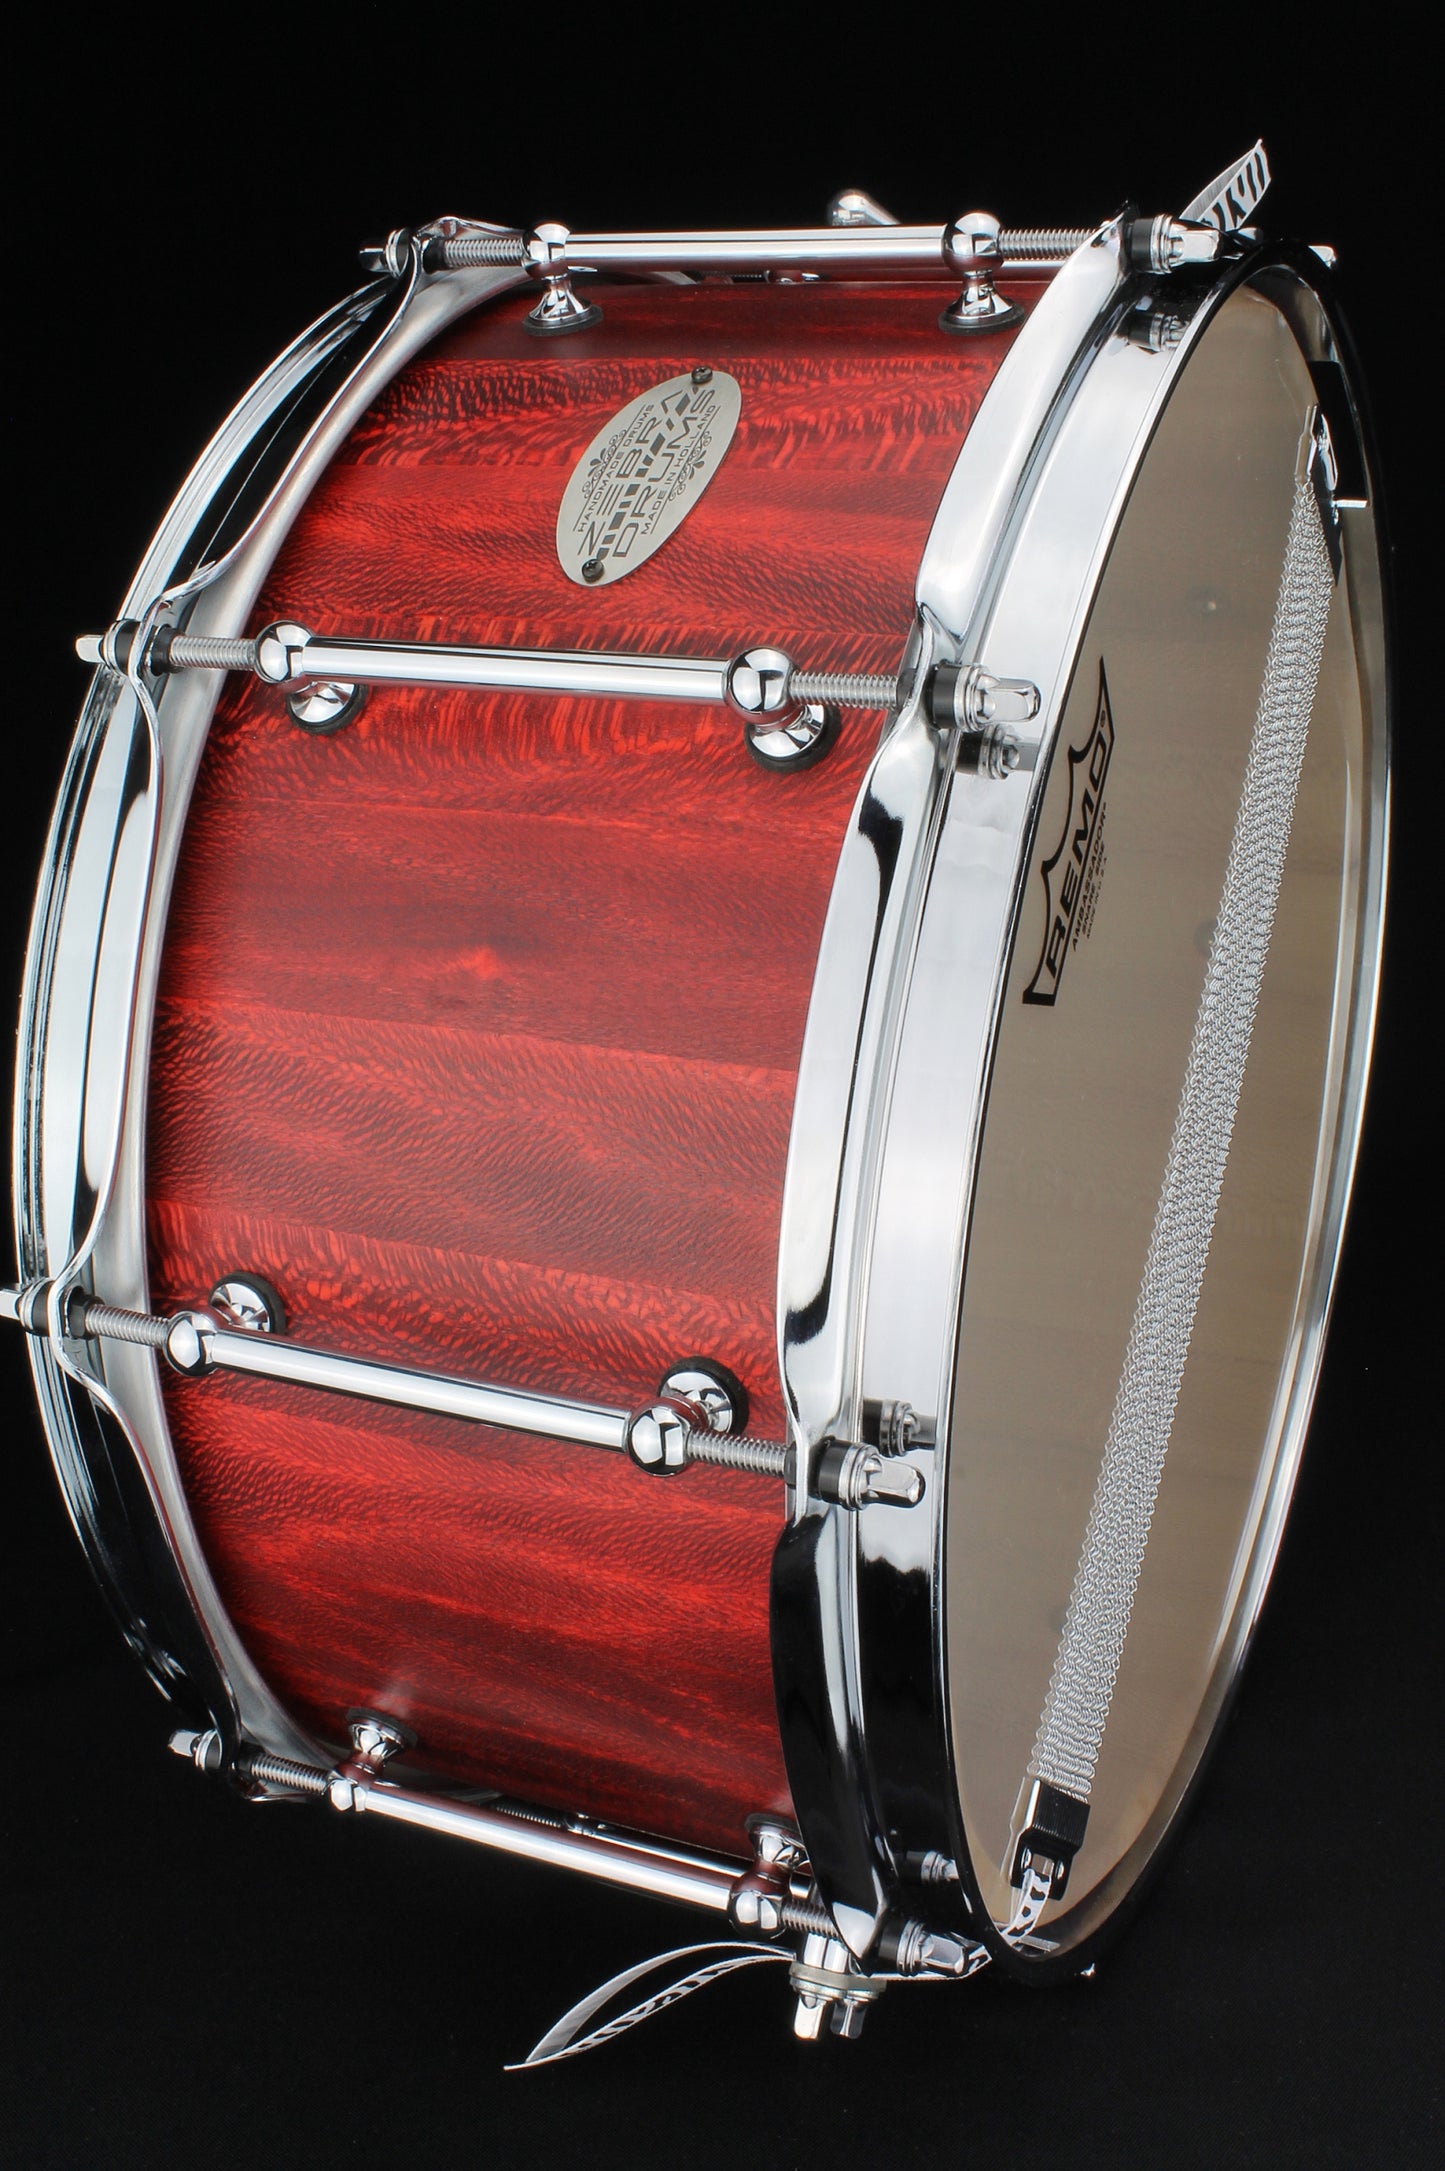 Zebra Drums 'Flaming Red' 14x6.5" Snare Drum